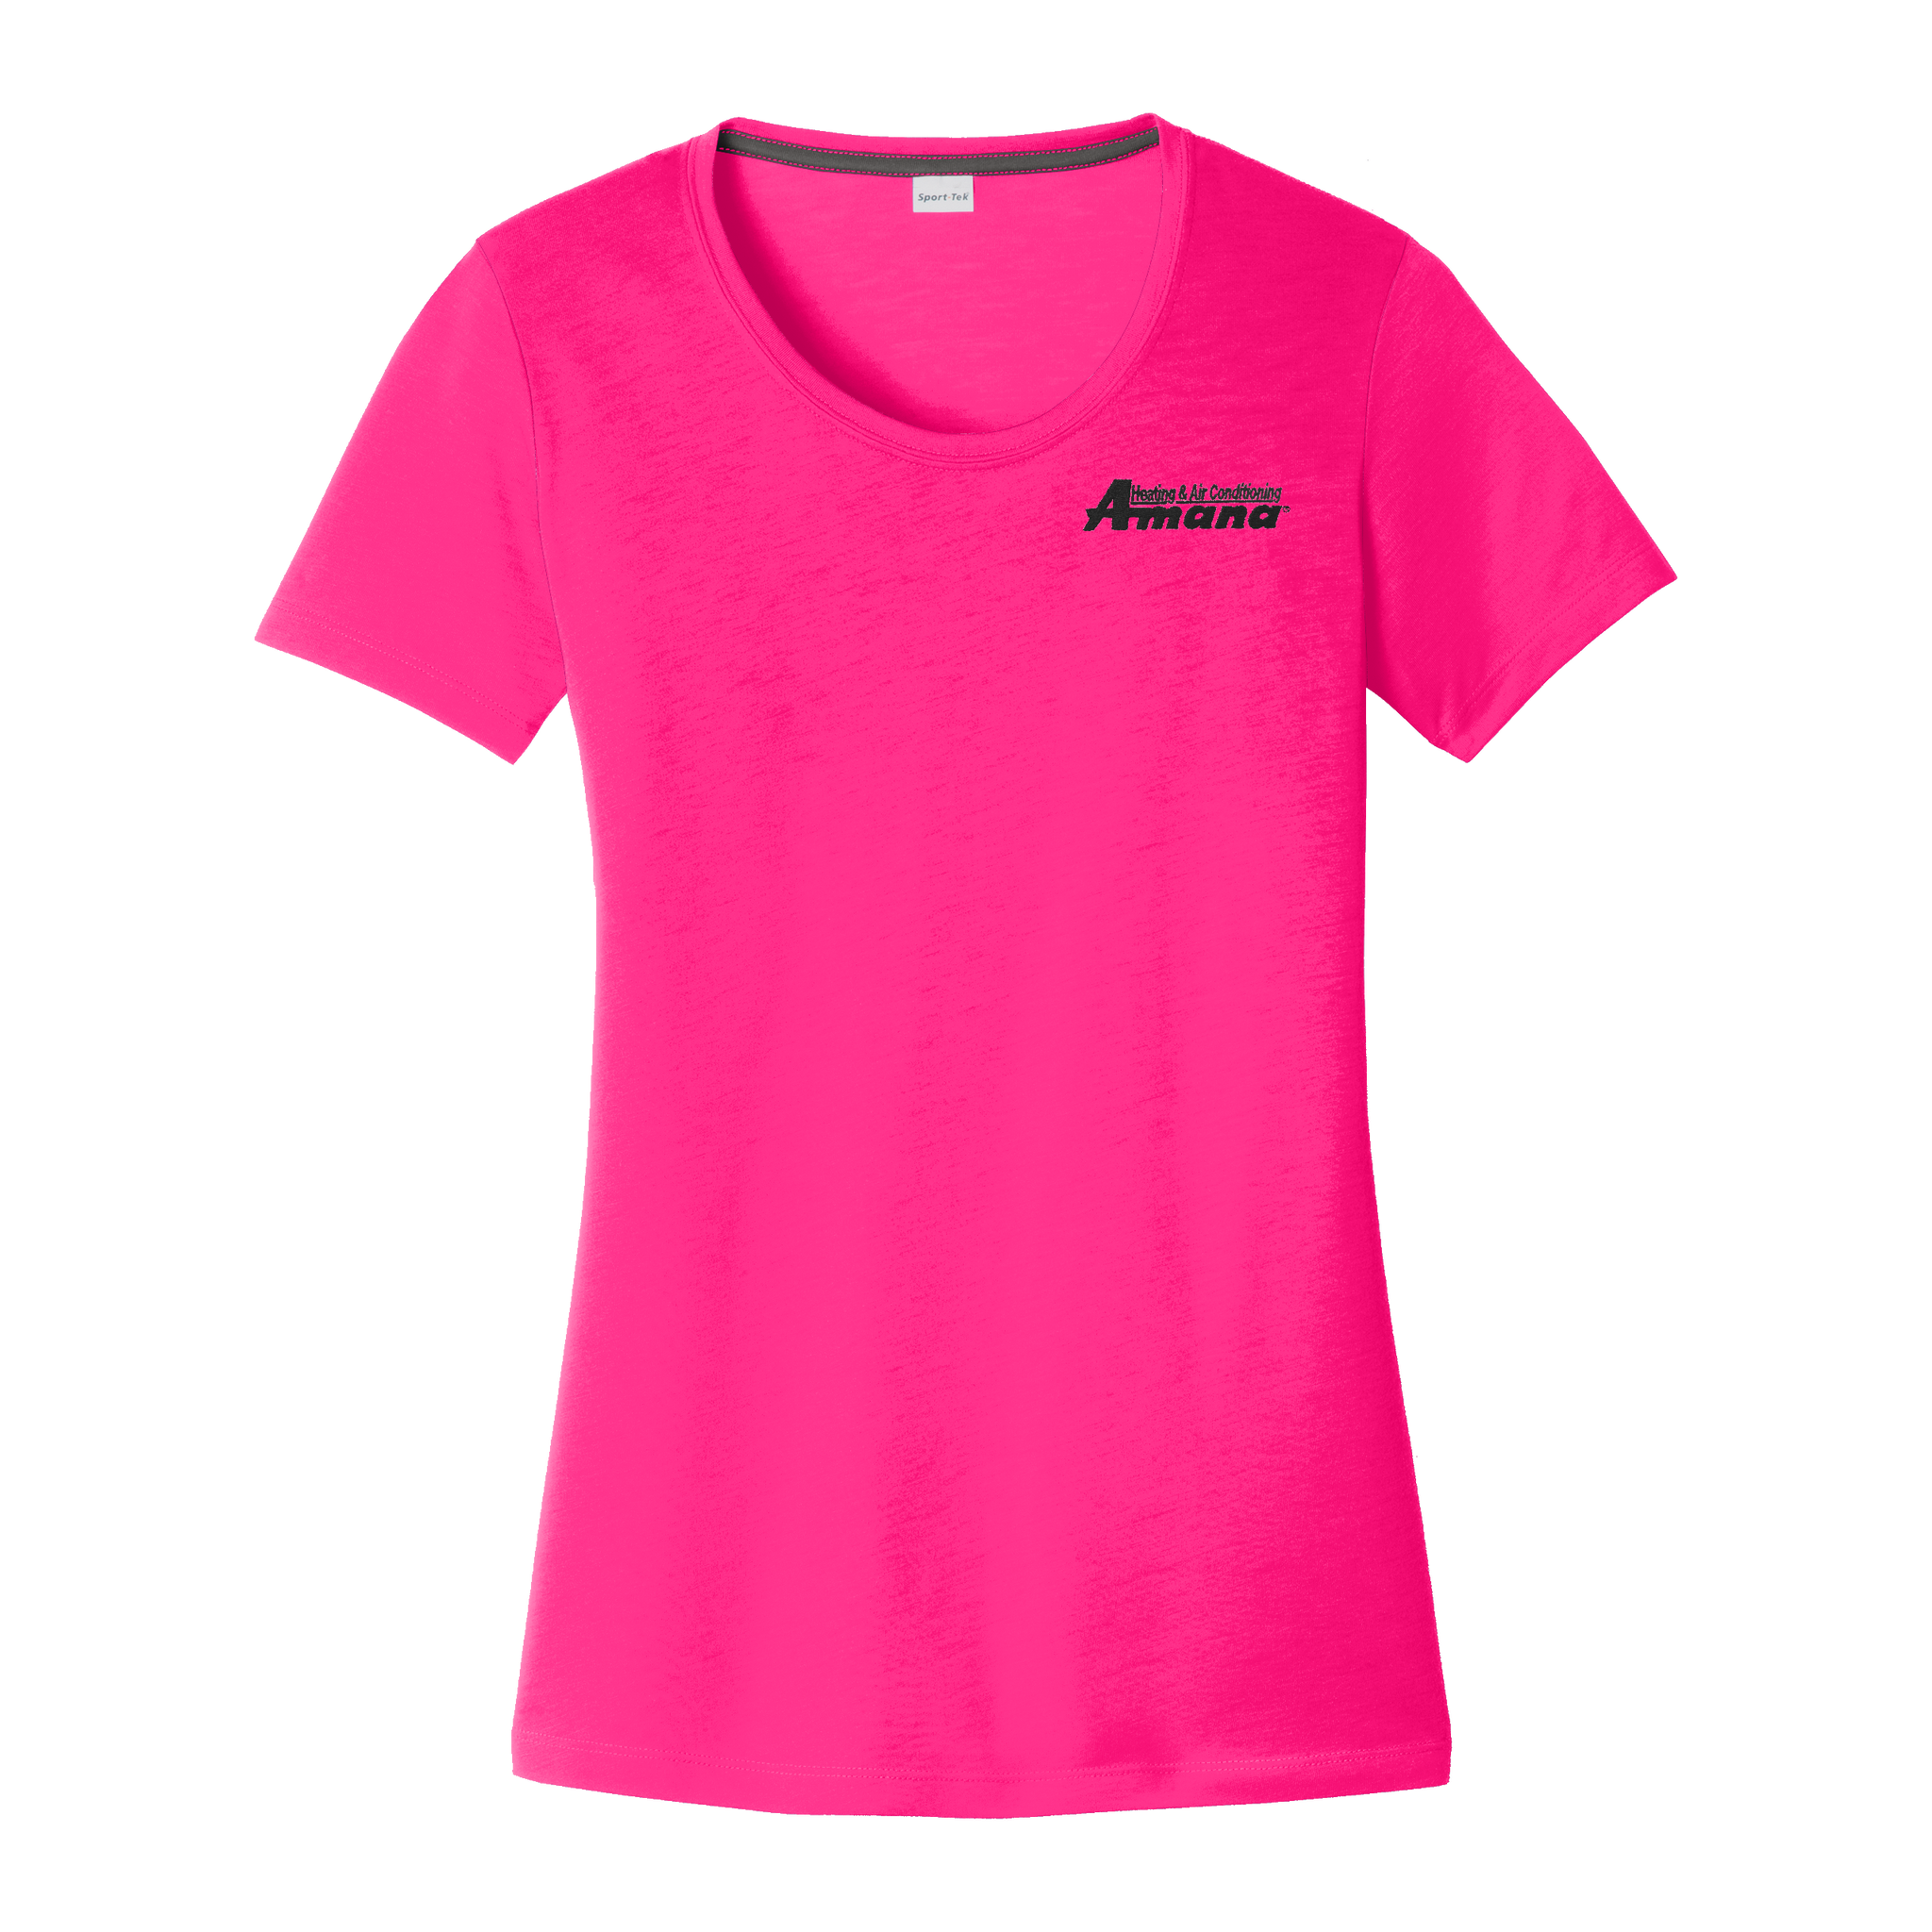 A1825W Ladies Competitor Cotton Touch Scoop Neck Tee